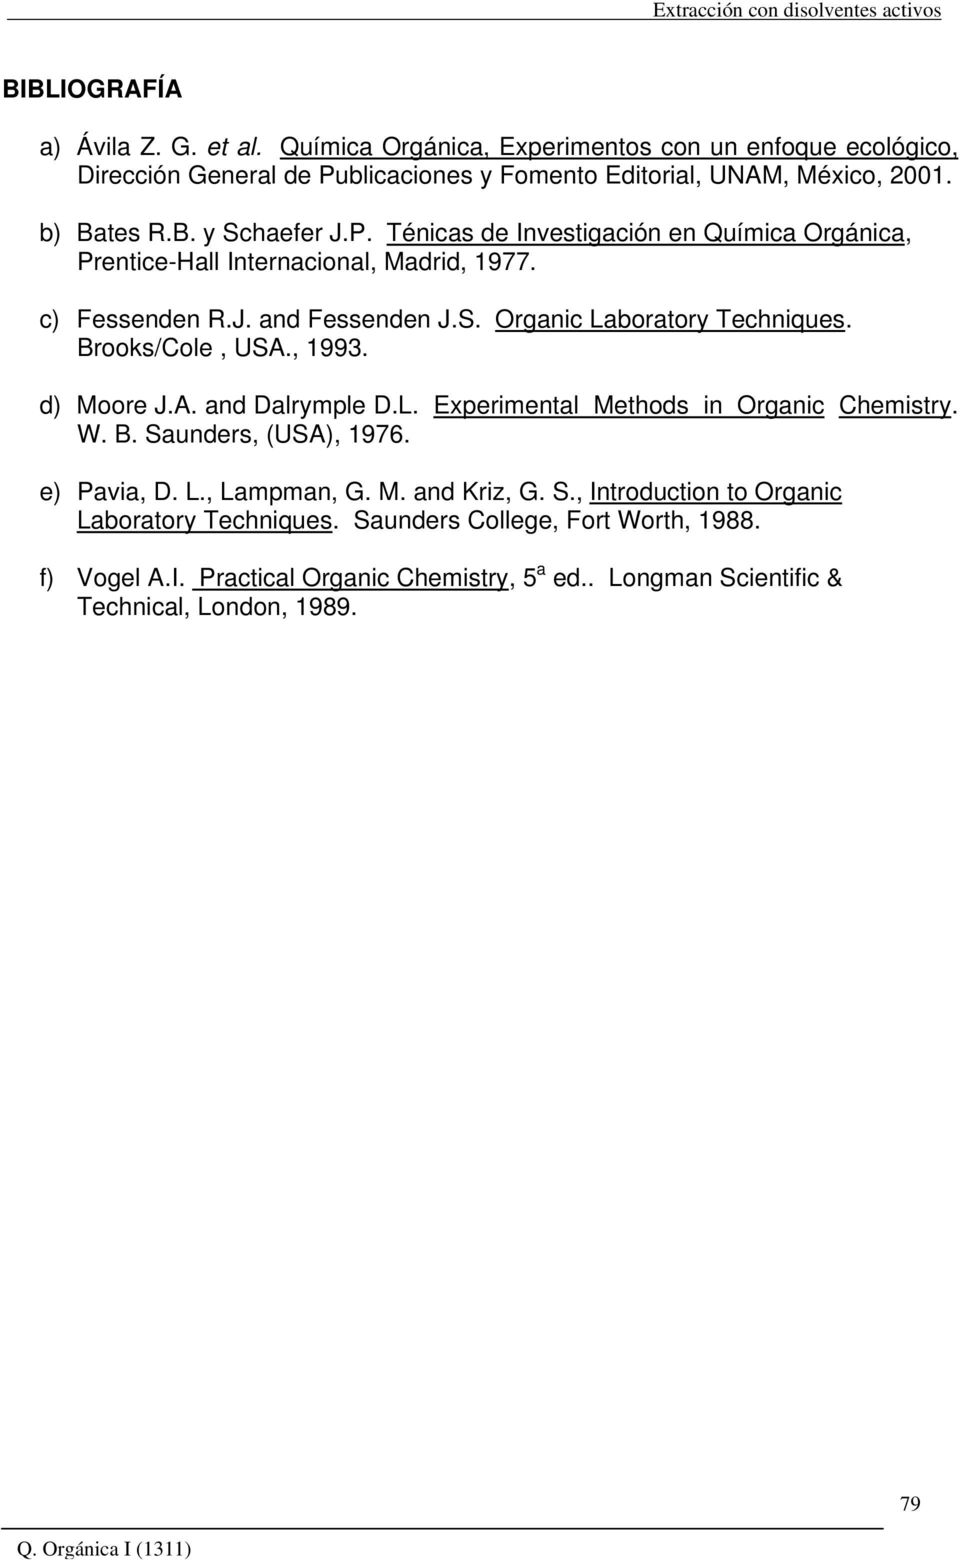 Brooks/Cole, USA., 1993. d) Moore J.A. and Dalrymple D.L. Experimental Methods in Organic Chemistry. W. B. Saunders, (USA), 1976. e) Pavia, D. L., Lampman, G. M. and Kriz, G. S., Introduction to Organic Laboratory Techniques.